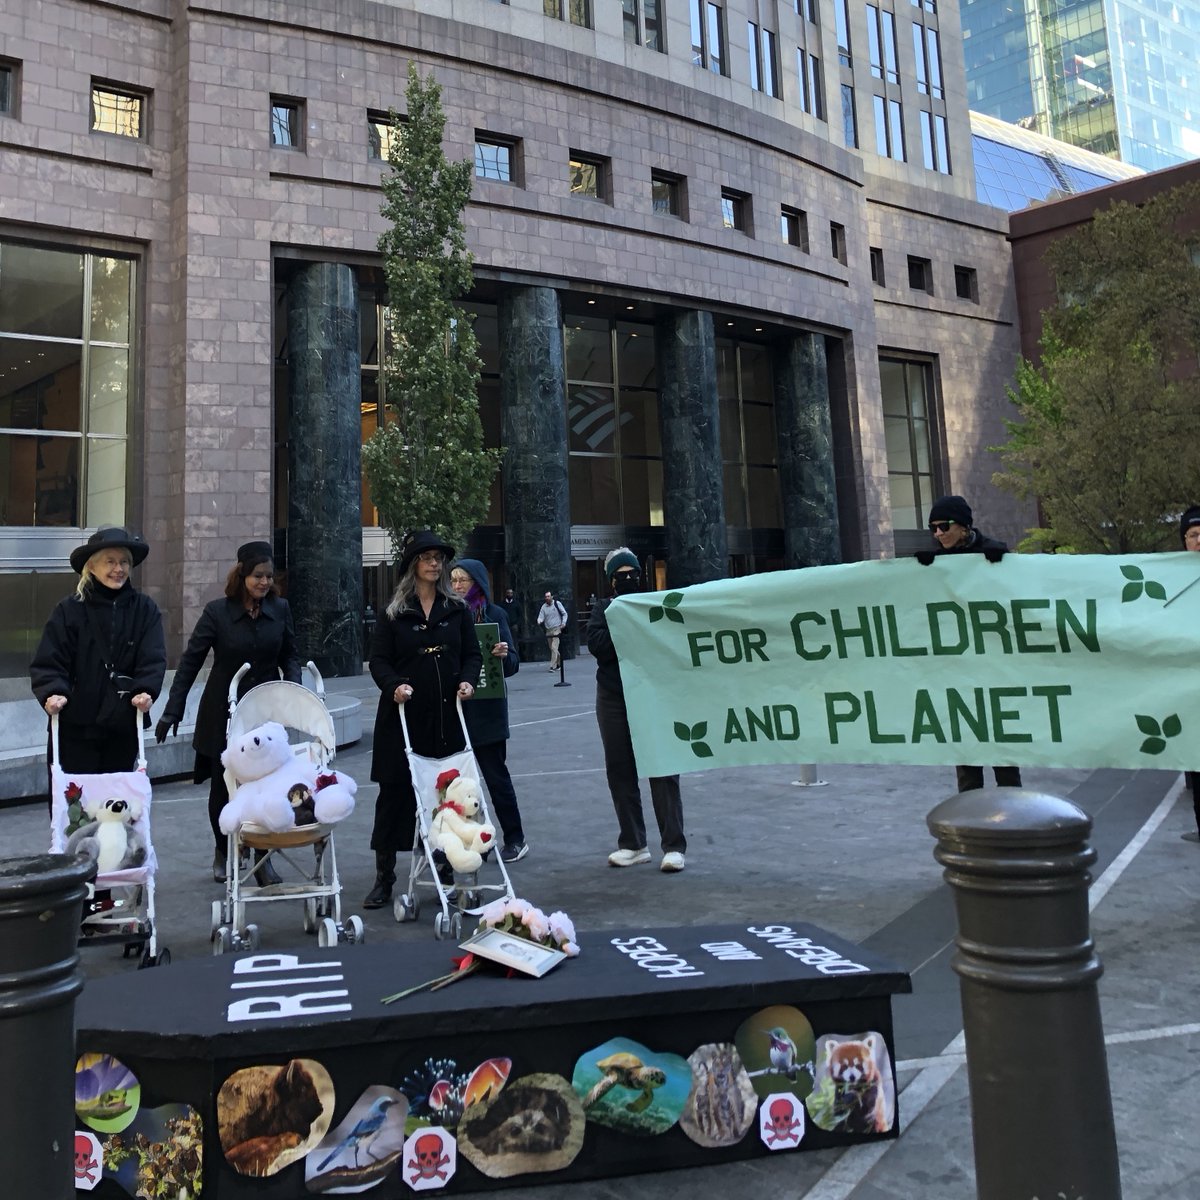 GreenFaith Charlotte NC is hosting a Requiem for the Children ritual of mourning in front of @BankofAmerica @WellsFargo and @Chase branches, for the devastation caused to children and future generations by their fossil fuel financing. #Faiths4Climate #StopFundingFossils